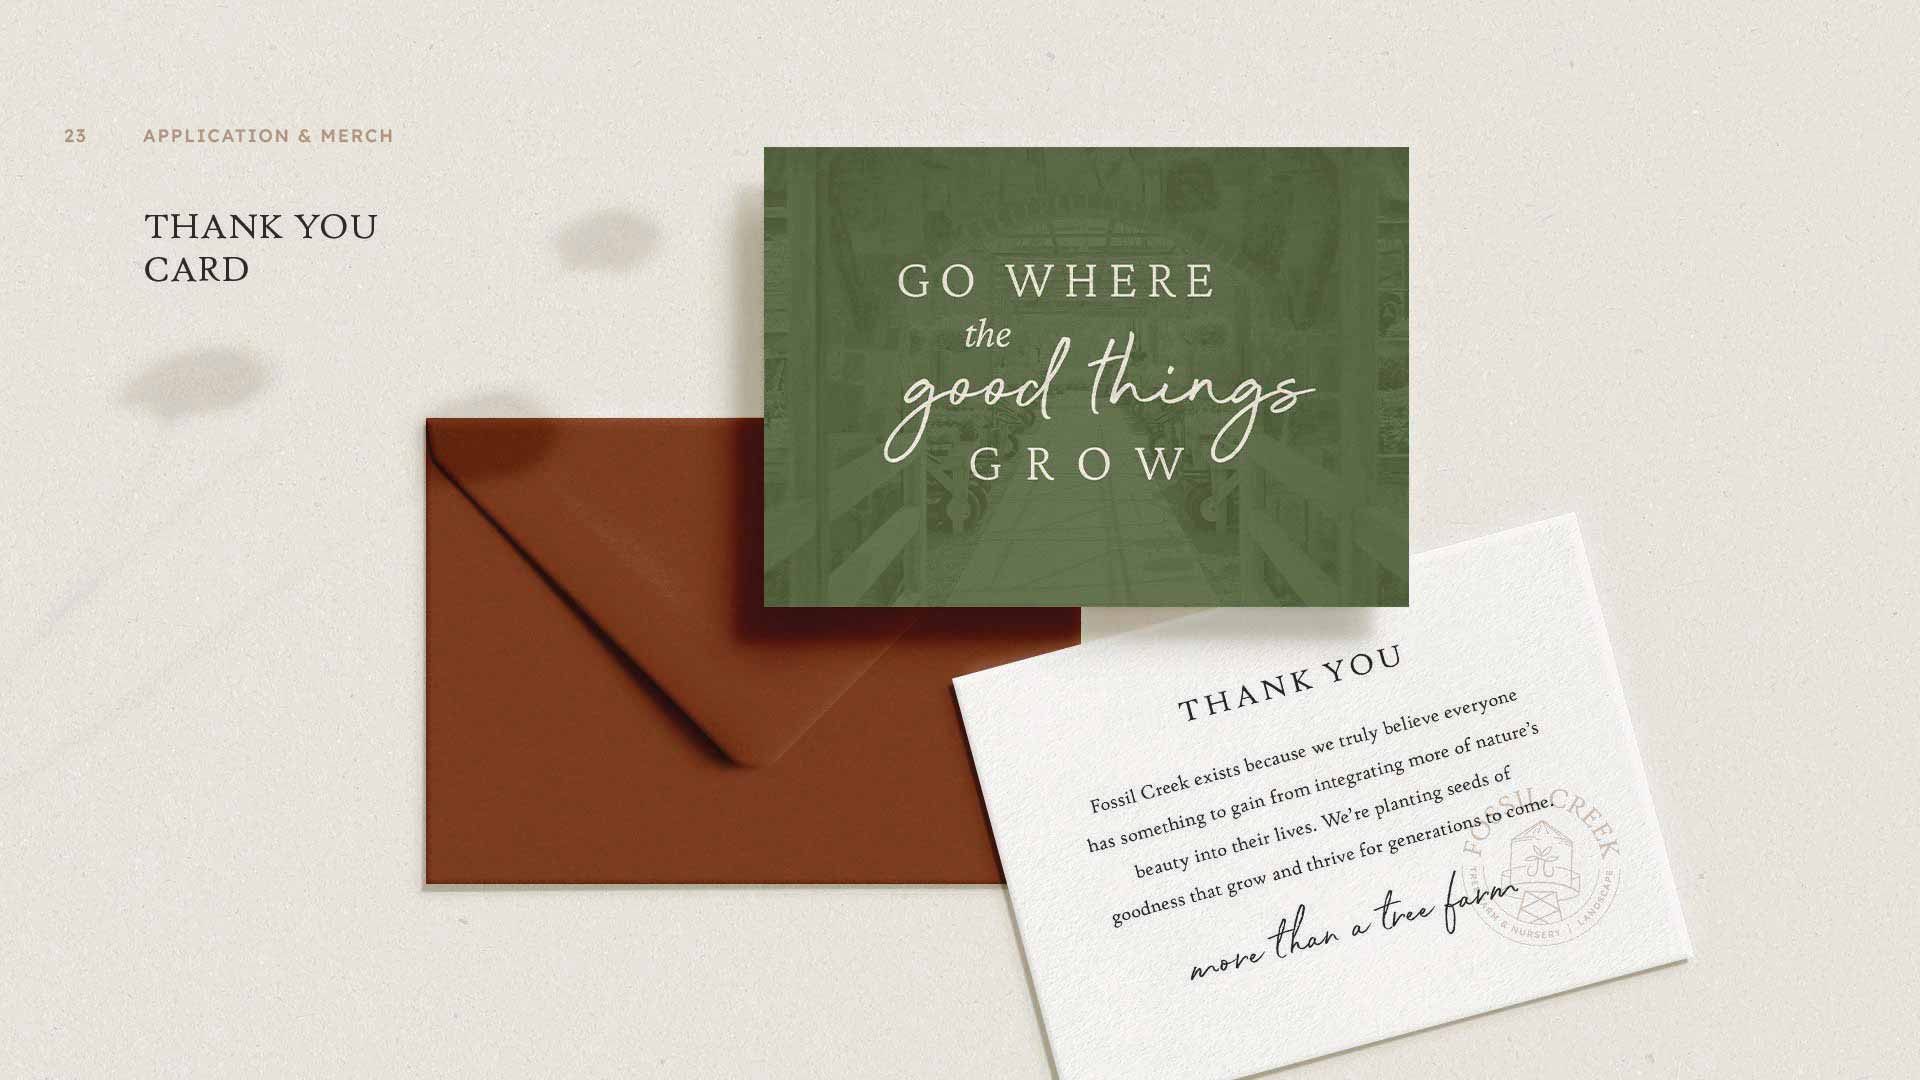 Fossil Creek Tree Farm brand design applied to greeting cards